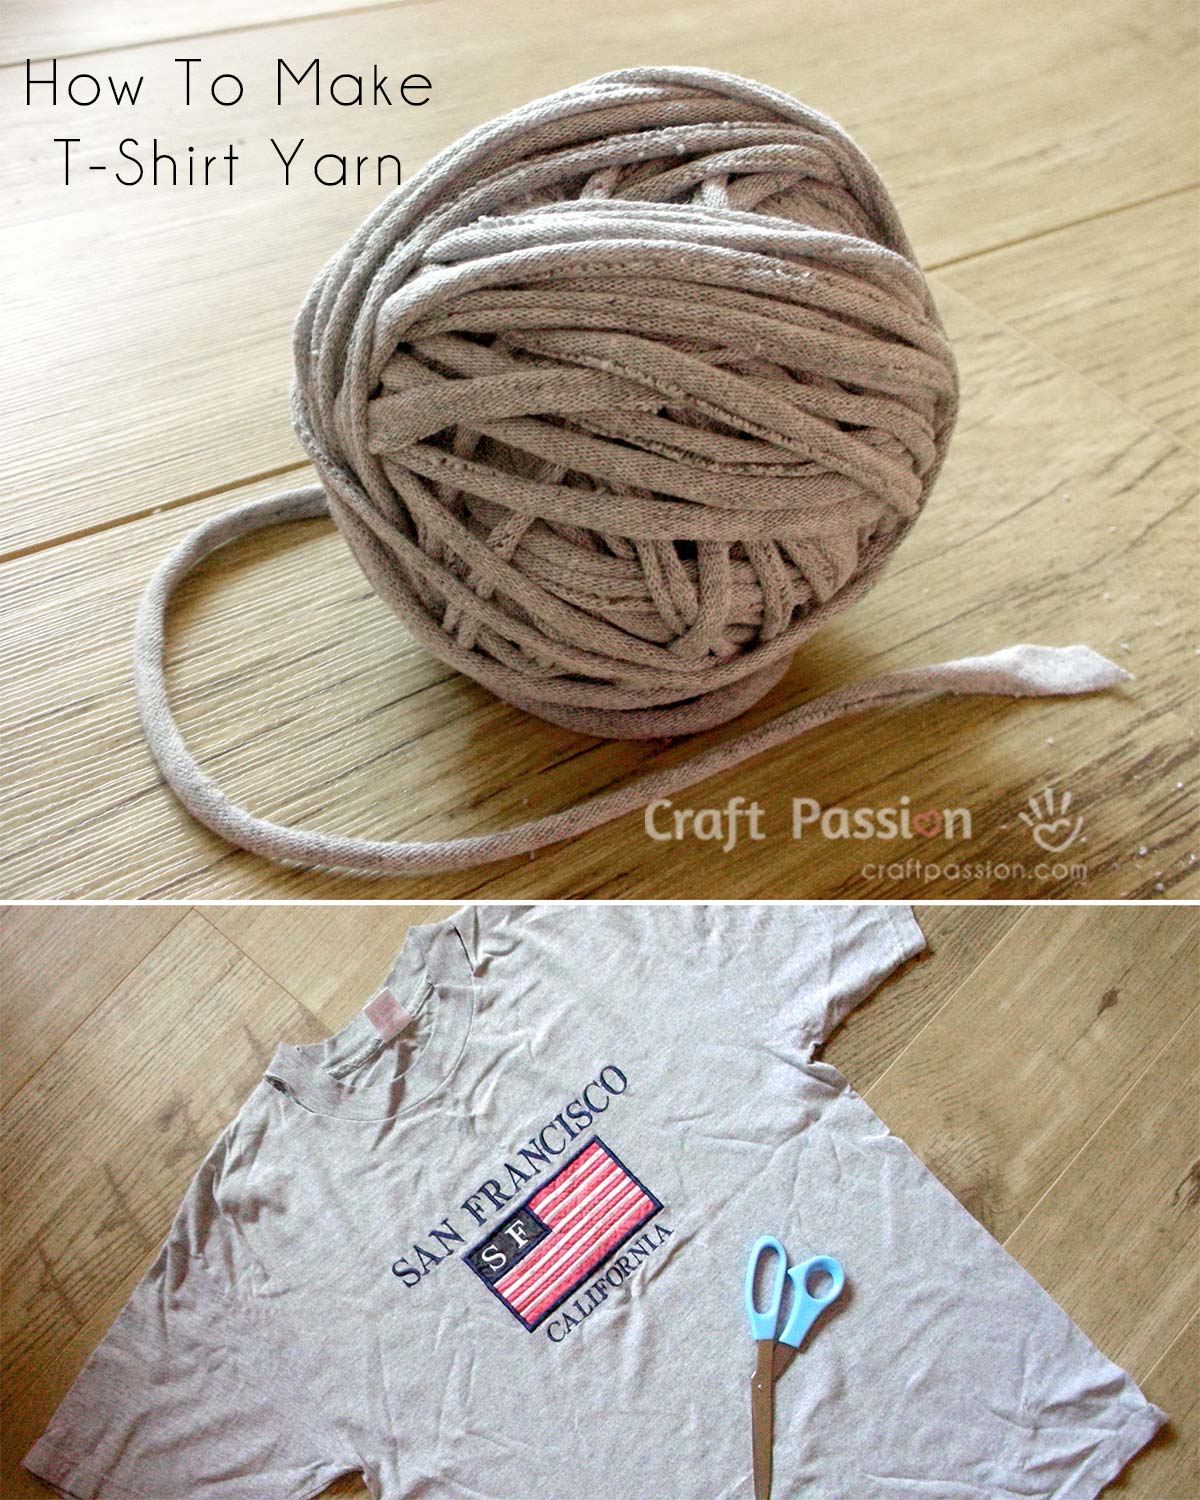 Learn how to recycle old t-shirts into yarn. This yarn is perfect to crochet and knit into basket, bag, rug, scarf etc. It's eco-friendly and helps to recycle.